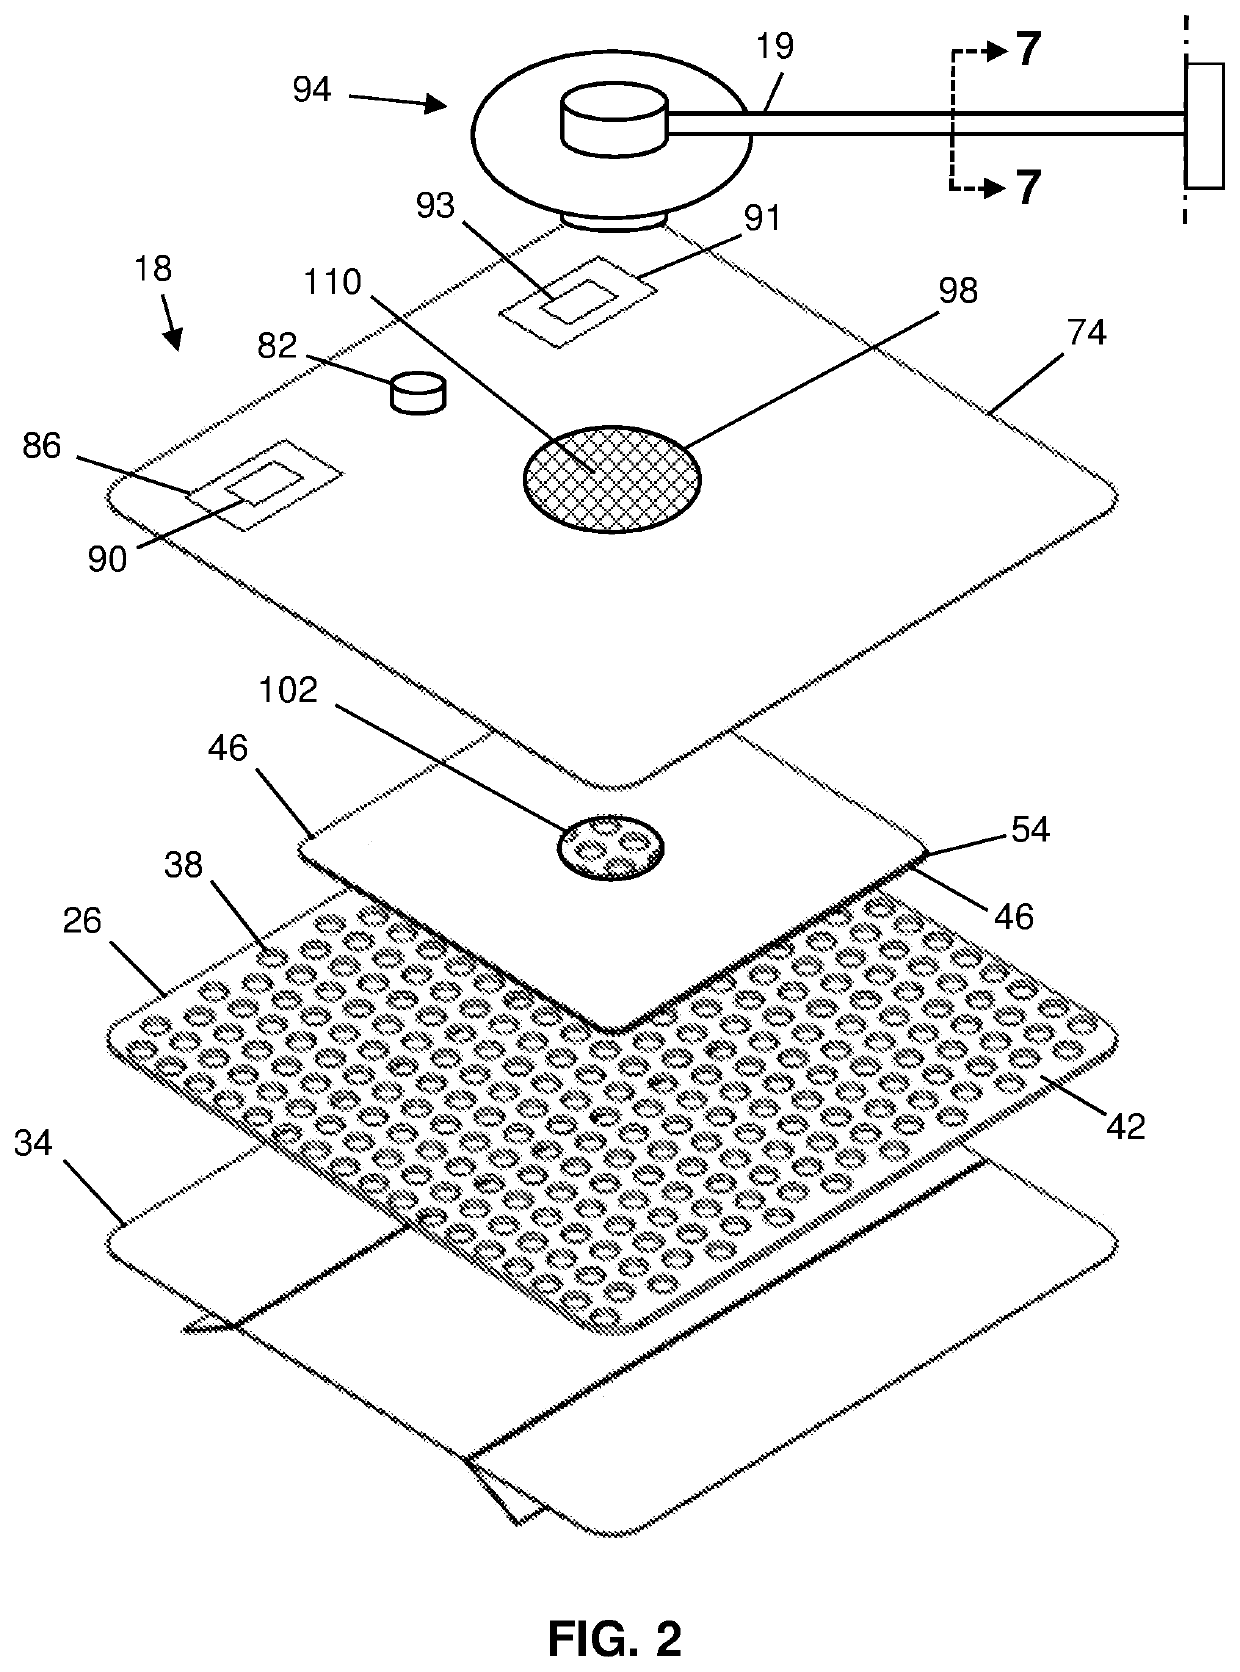 Wound Dressings and Systems with Low-Flow Therapeutic Gas Sources for Topical Wound Therapy and Related Methods